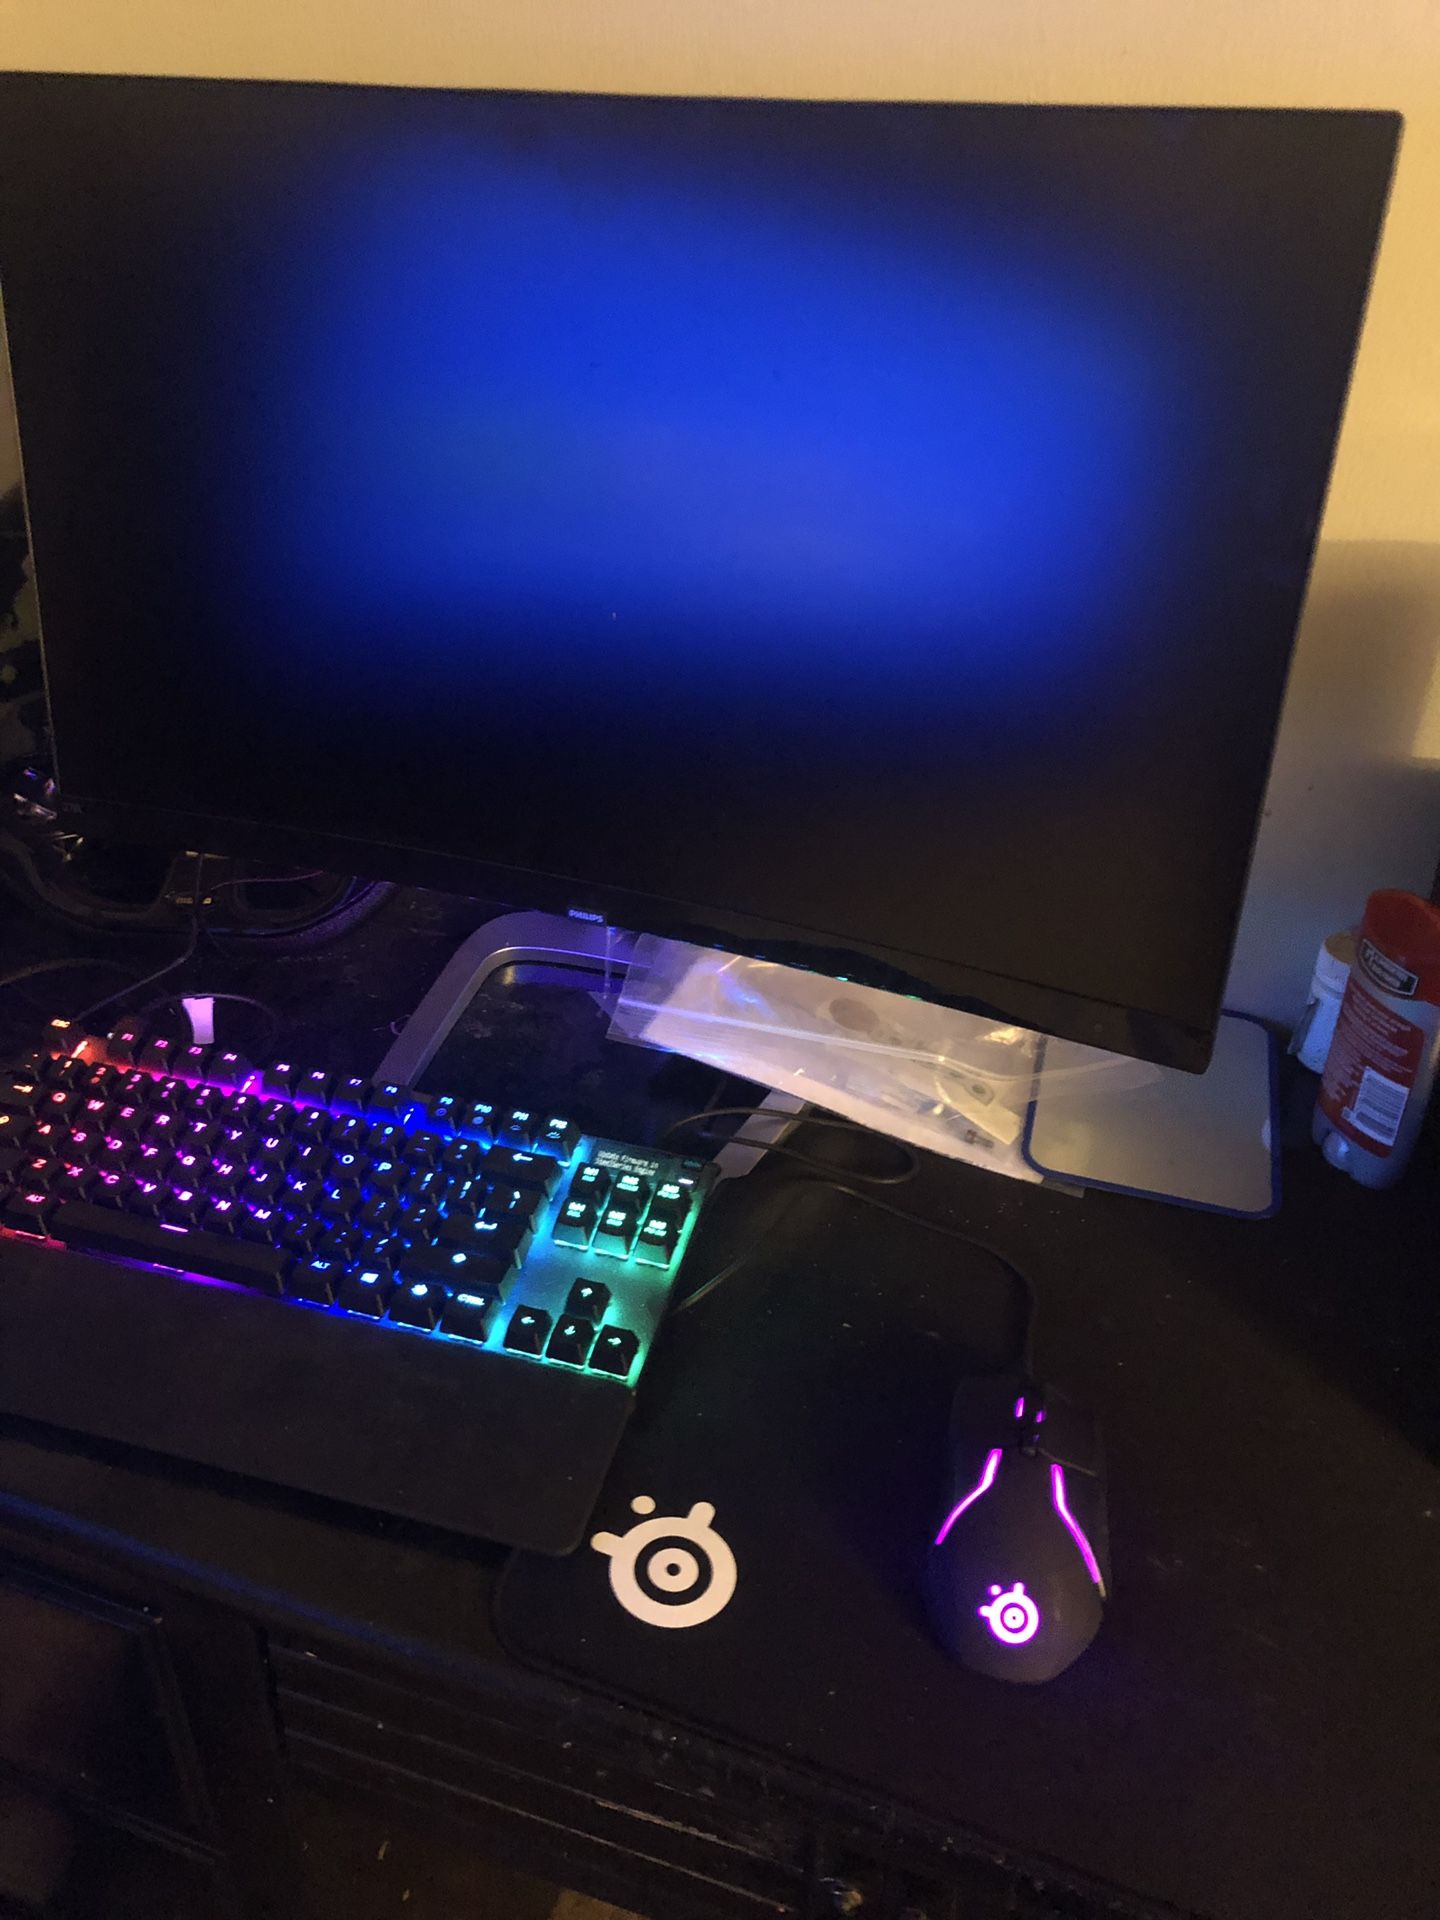 Philps curved monitor and Logitech mouse , keyboard, mousepad for gaming